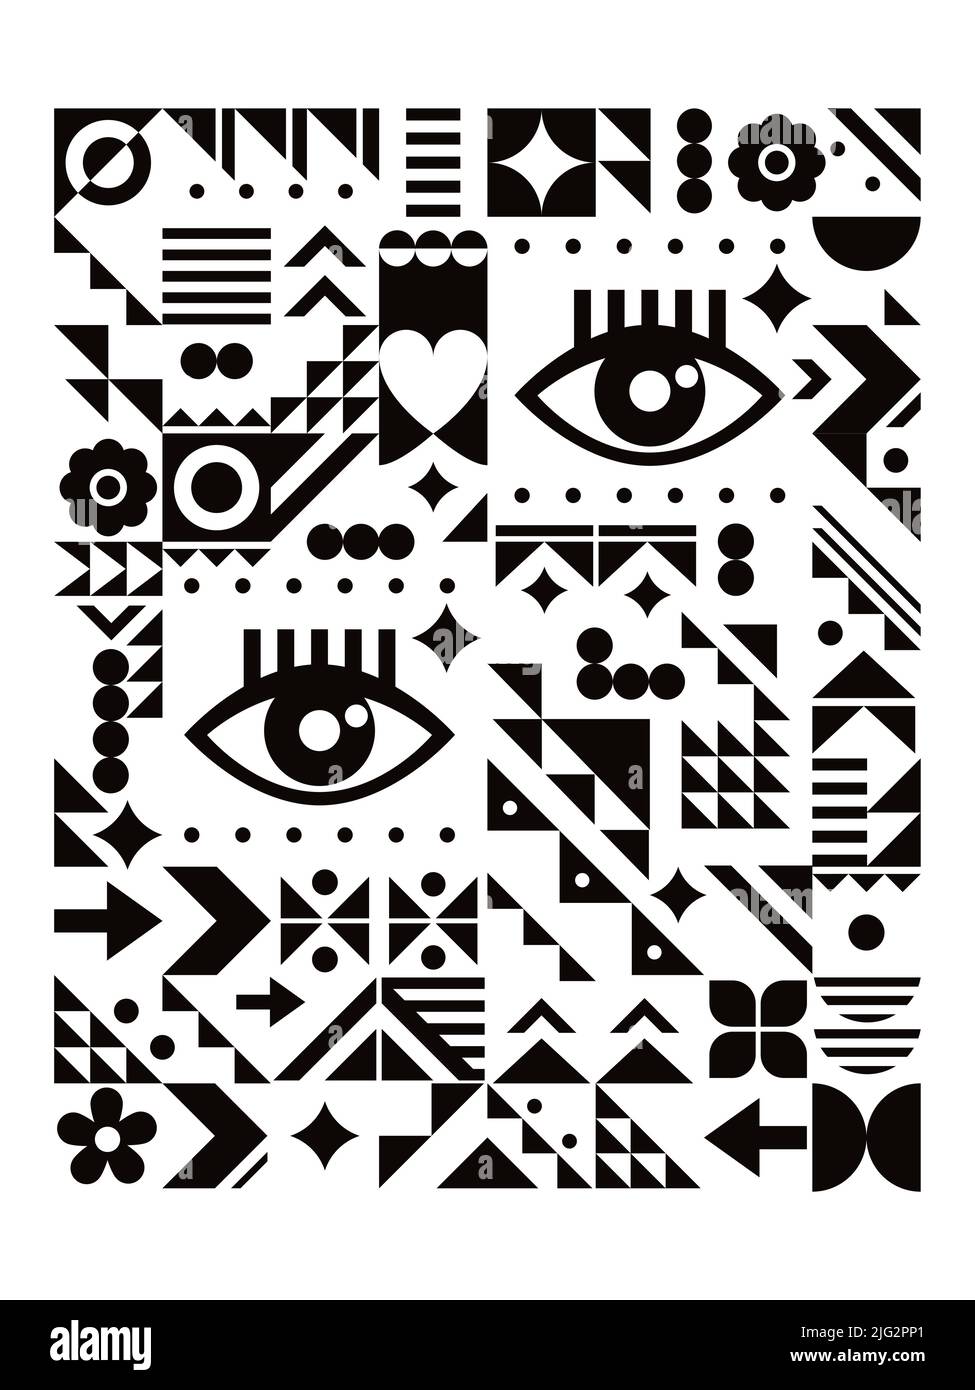 Bauhaus style vector poster art design 18x24 format in black and white with eyes and geometric shapes Stock Vector